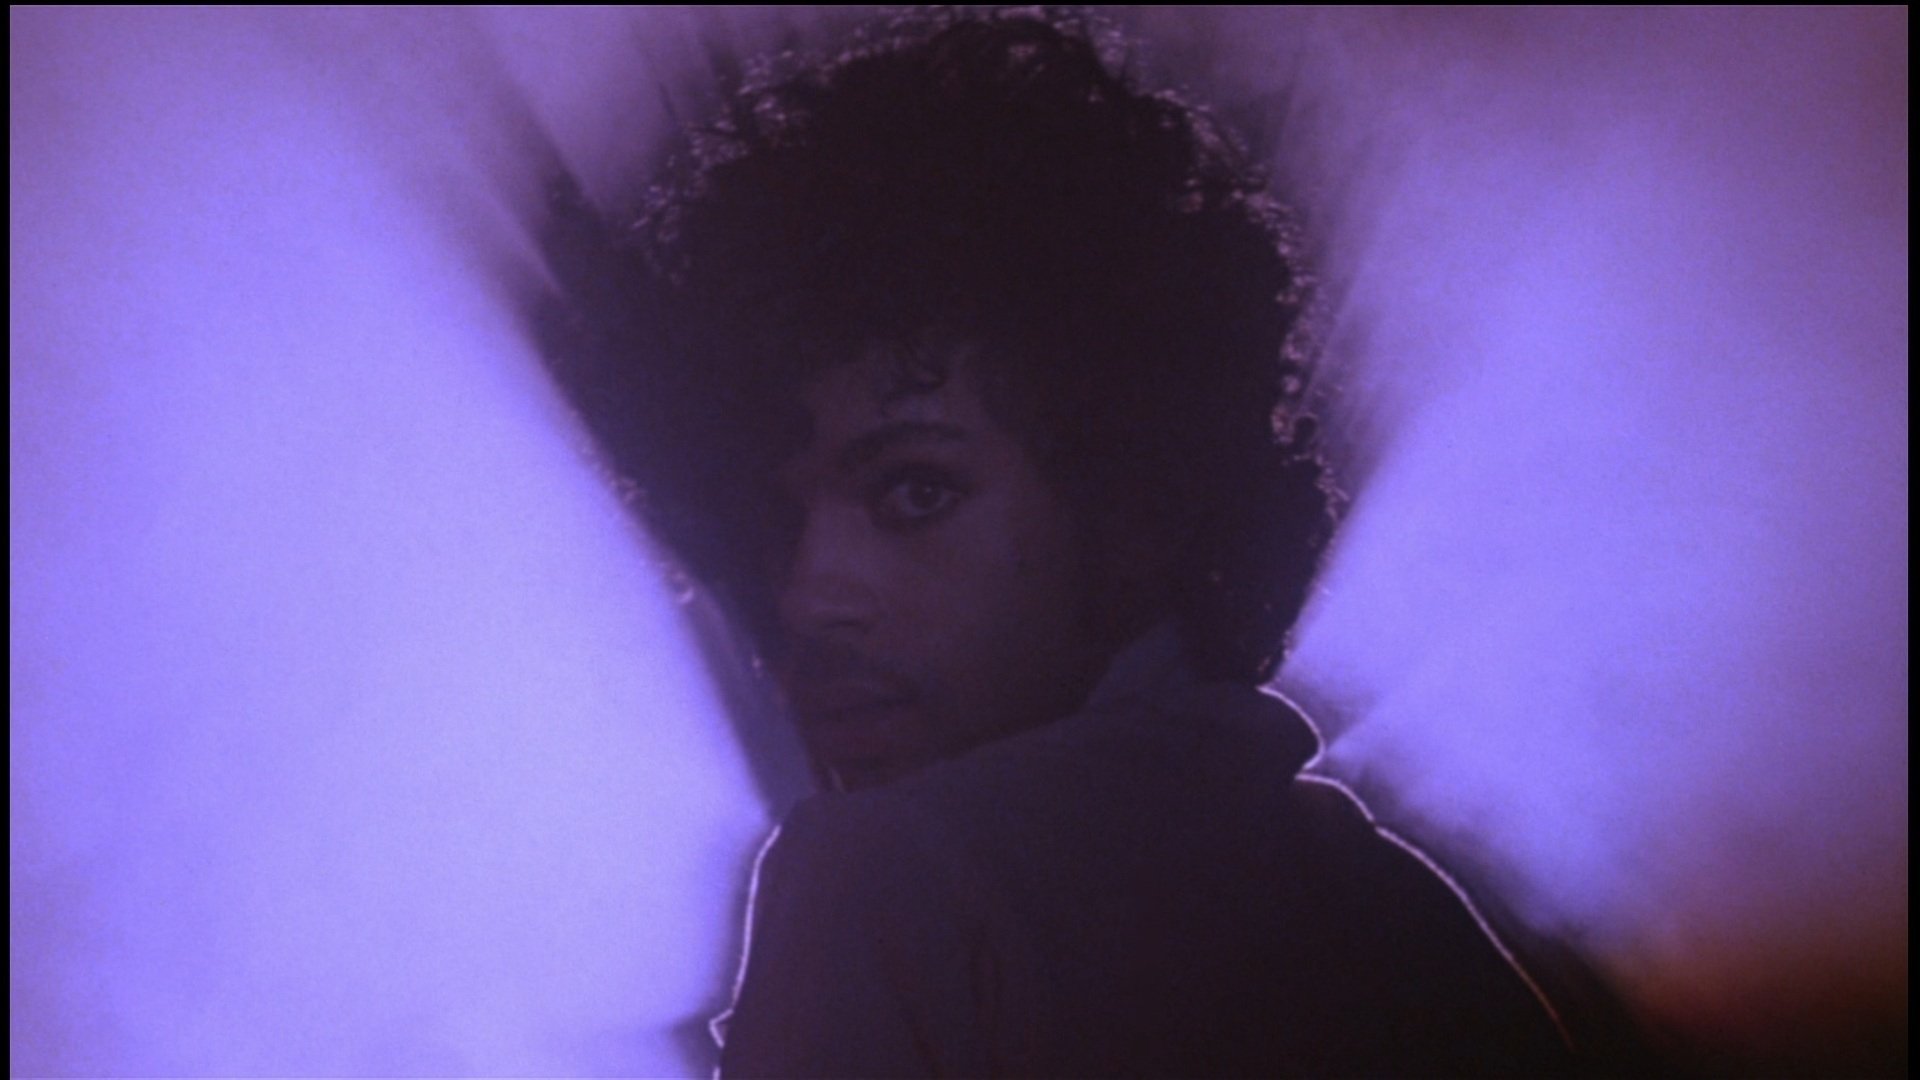 Prince HD Wallpaper | Background Image | 1920x1080